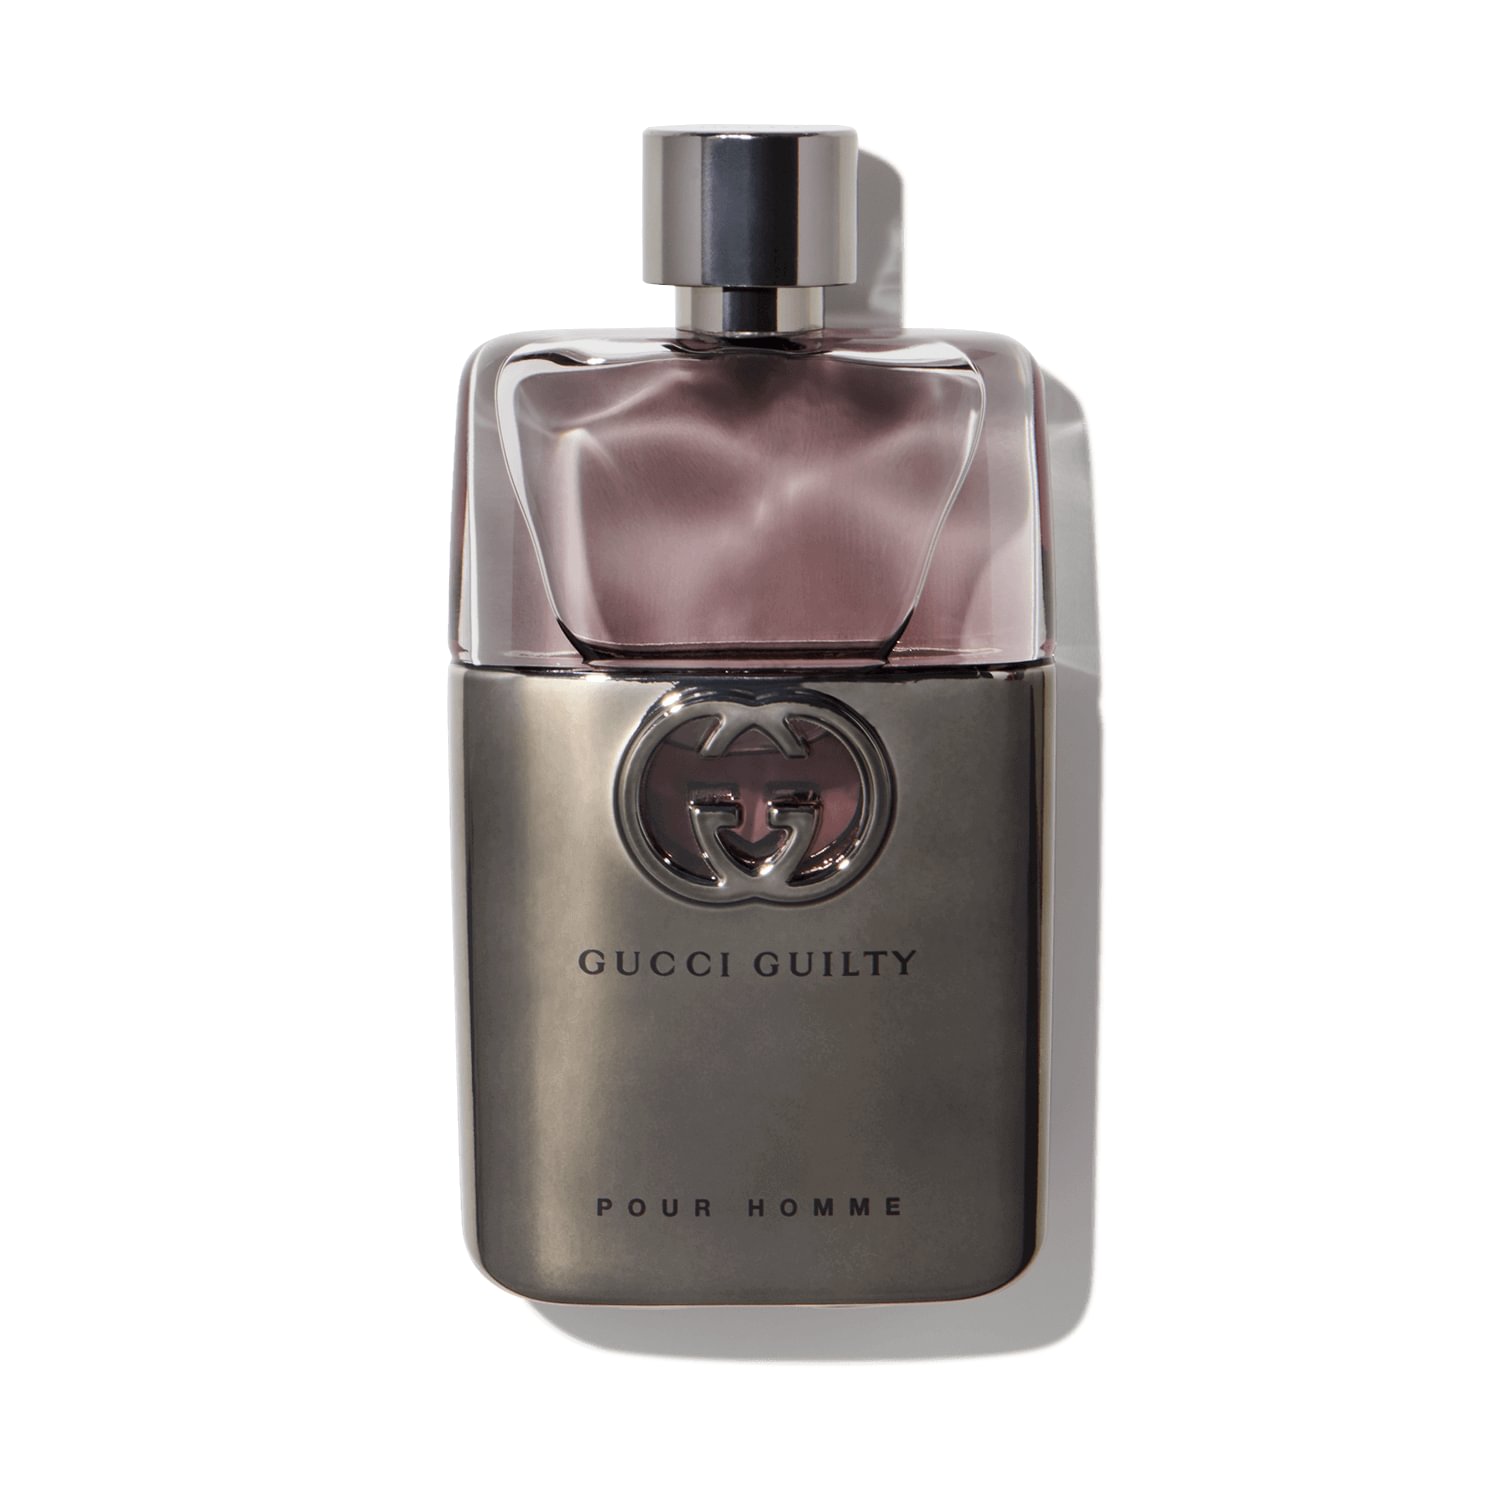 Get Guilty Pour Homme at Scentbird for